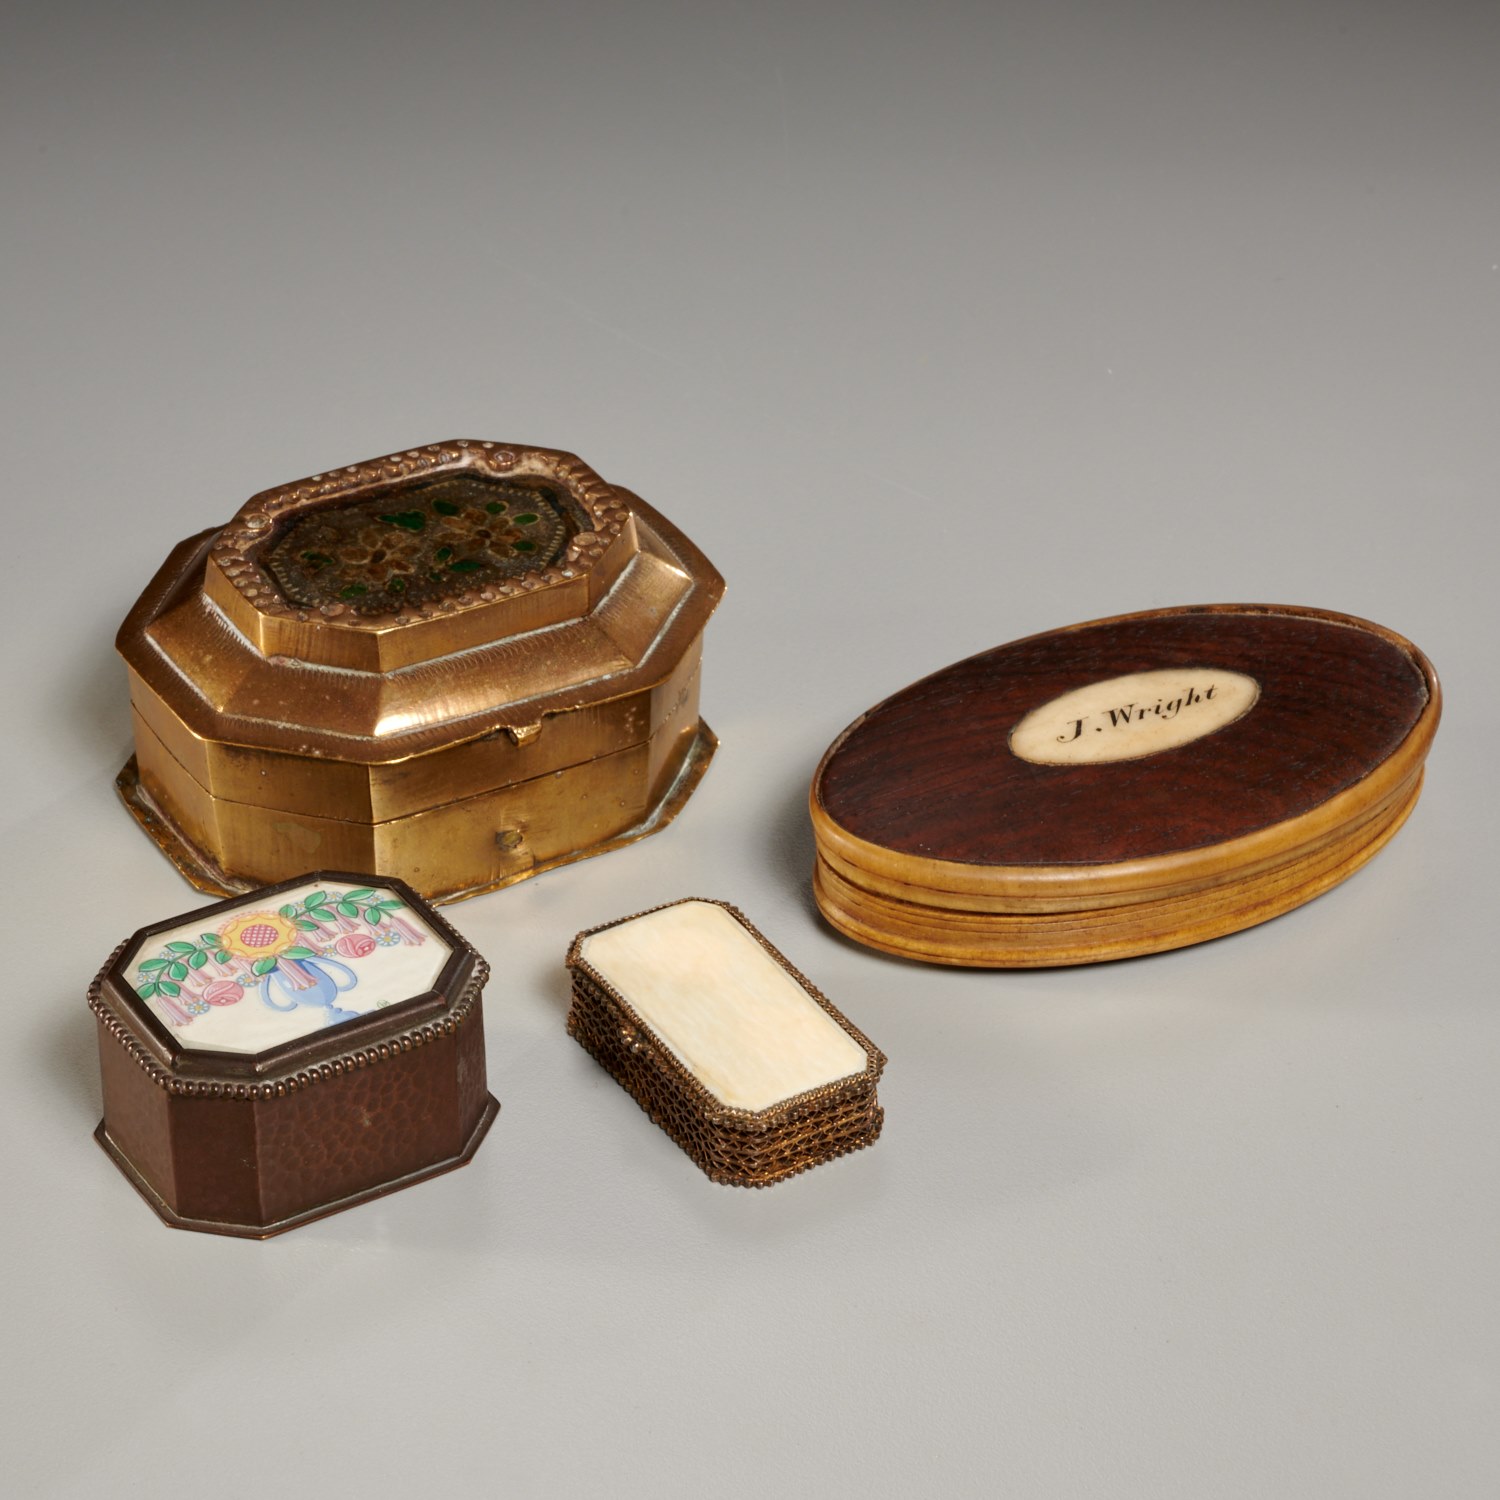  4 ANTIQUE TRINKET AND SNUFF BOXES 2a5d48